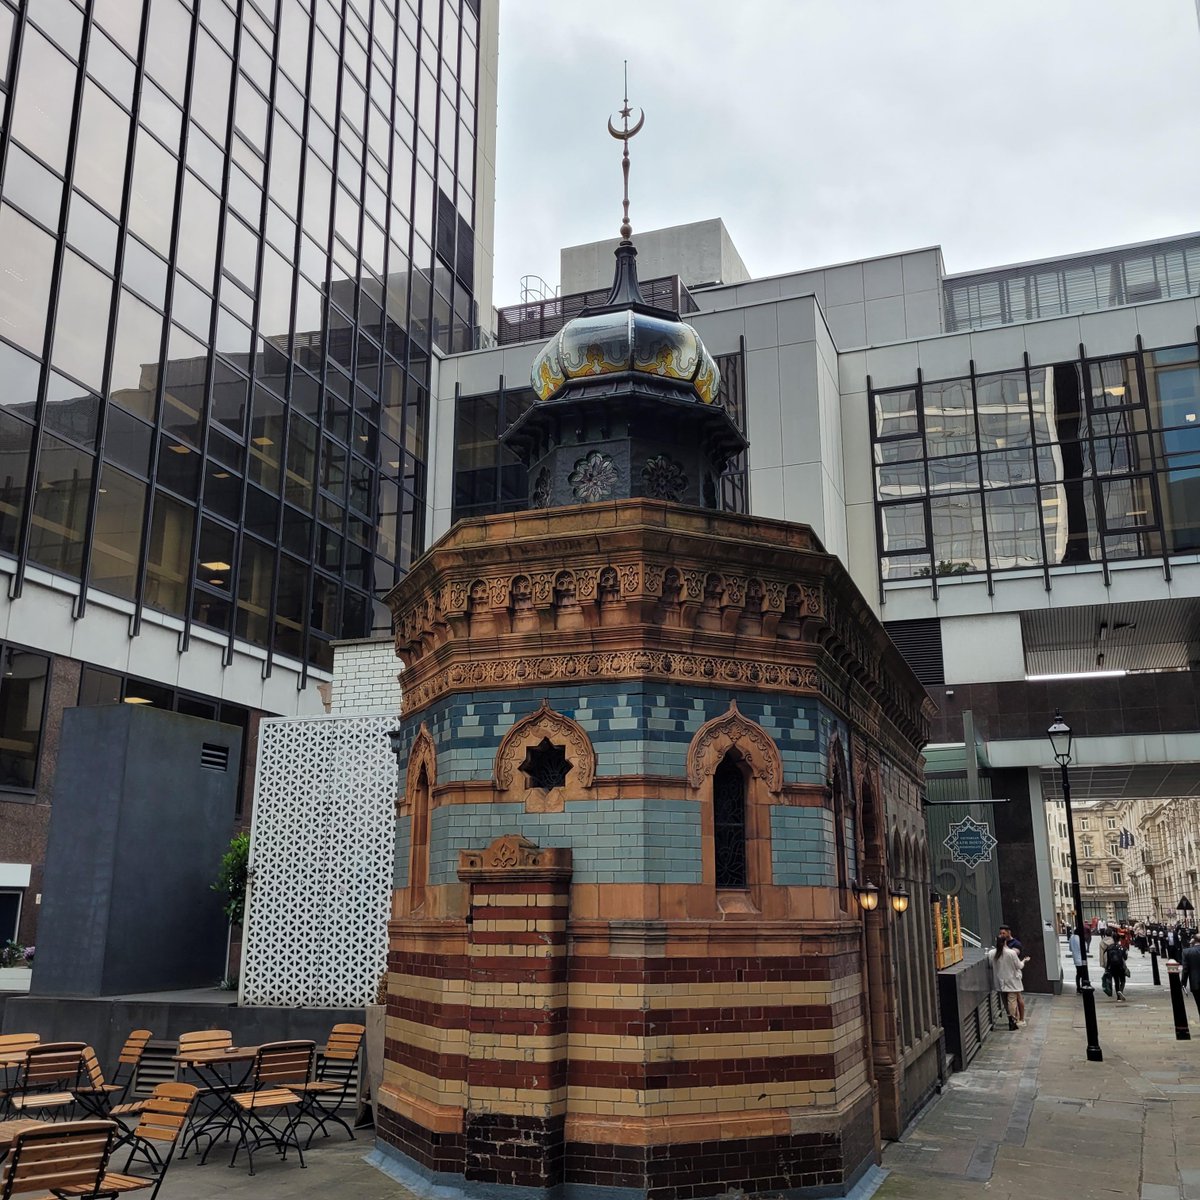 Today the City of London planning committee approved the application that will allow a developer to cantilever over the Bishopsgate Bathhouse. Our caseworker spoke at the meeting. We are very, very sad. We will keep you informed if there is further news. #cityoflondon #heritage